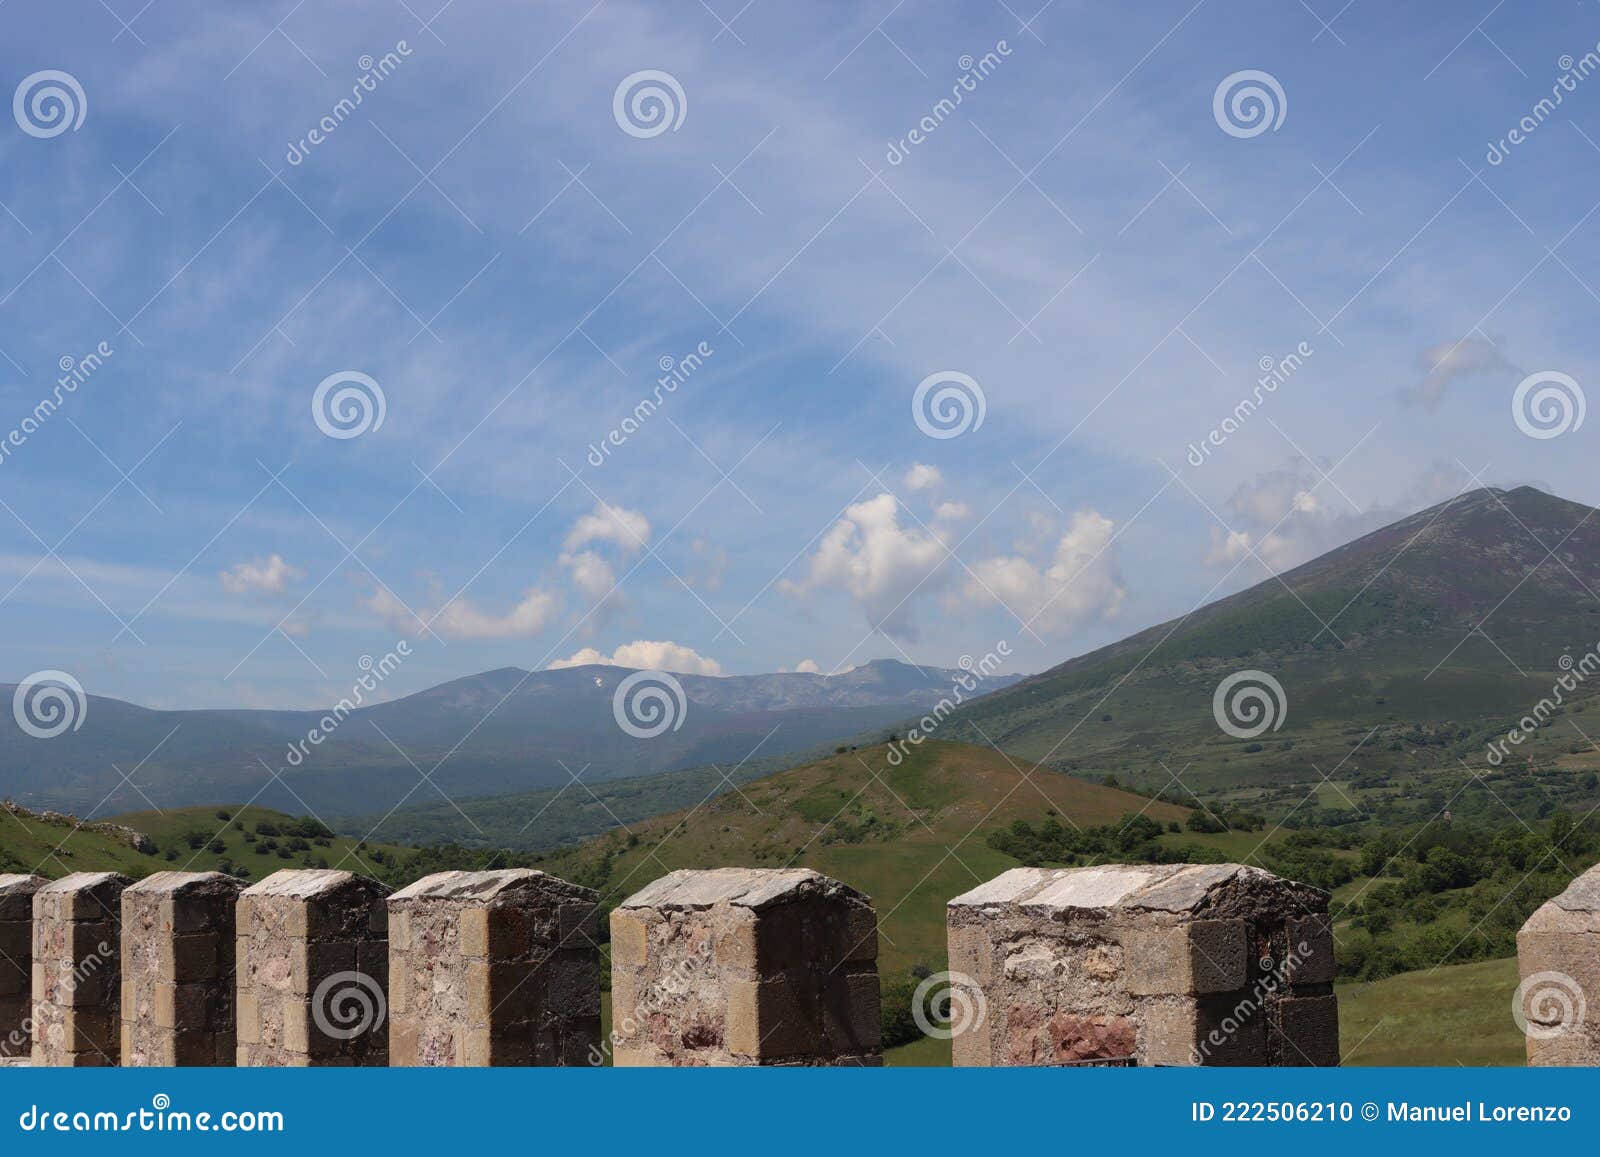 beautiful castle fortress old stone resistant battlements